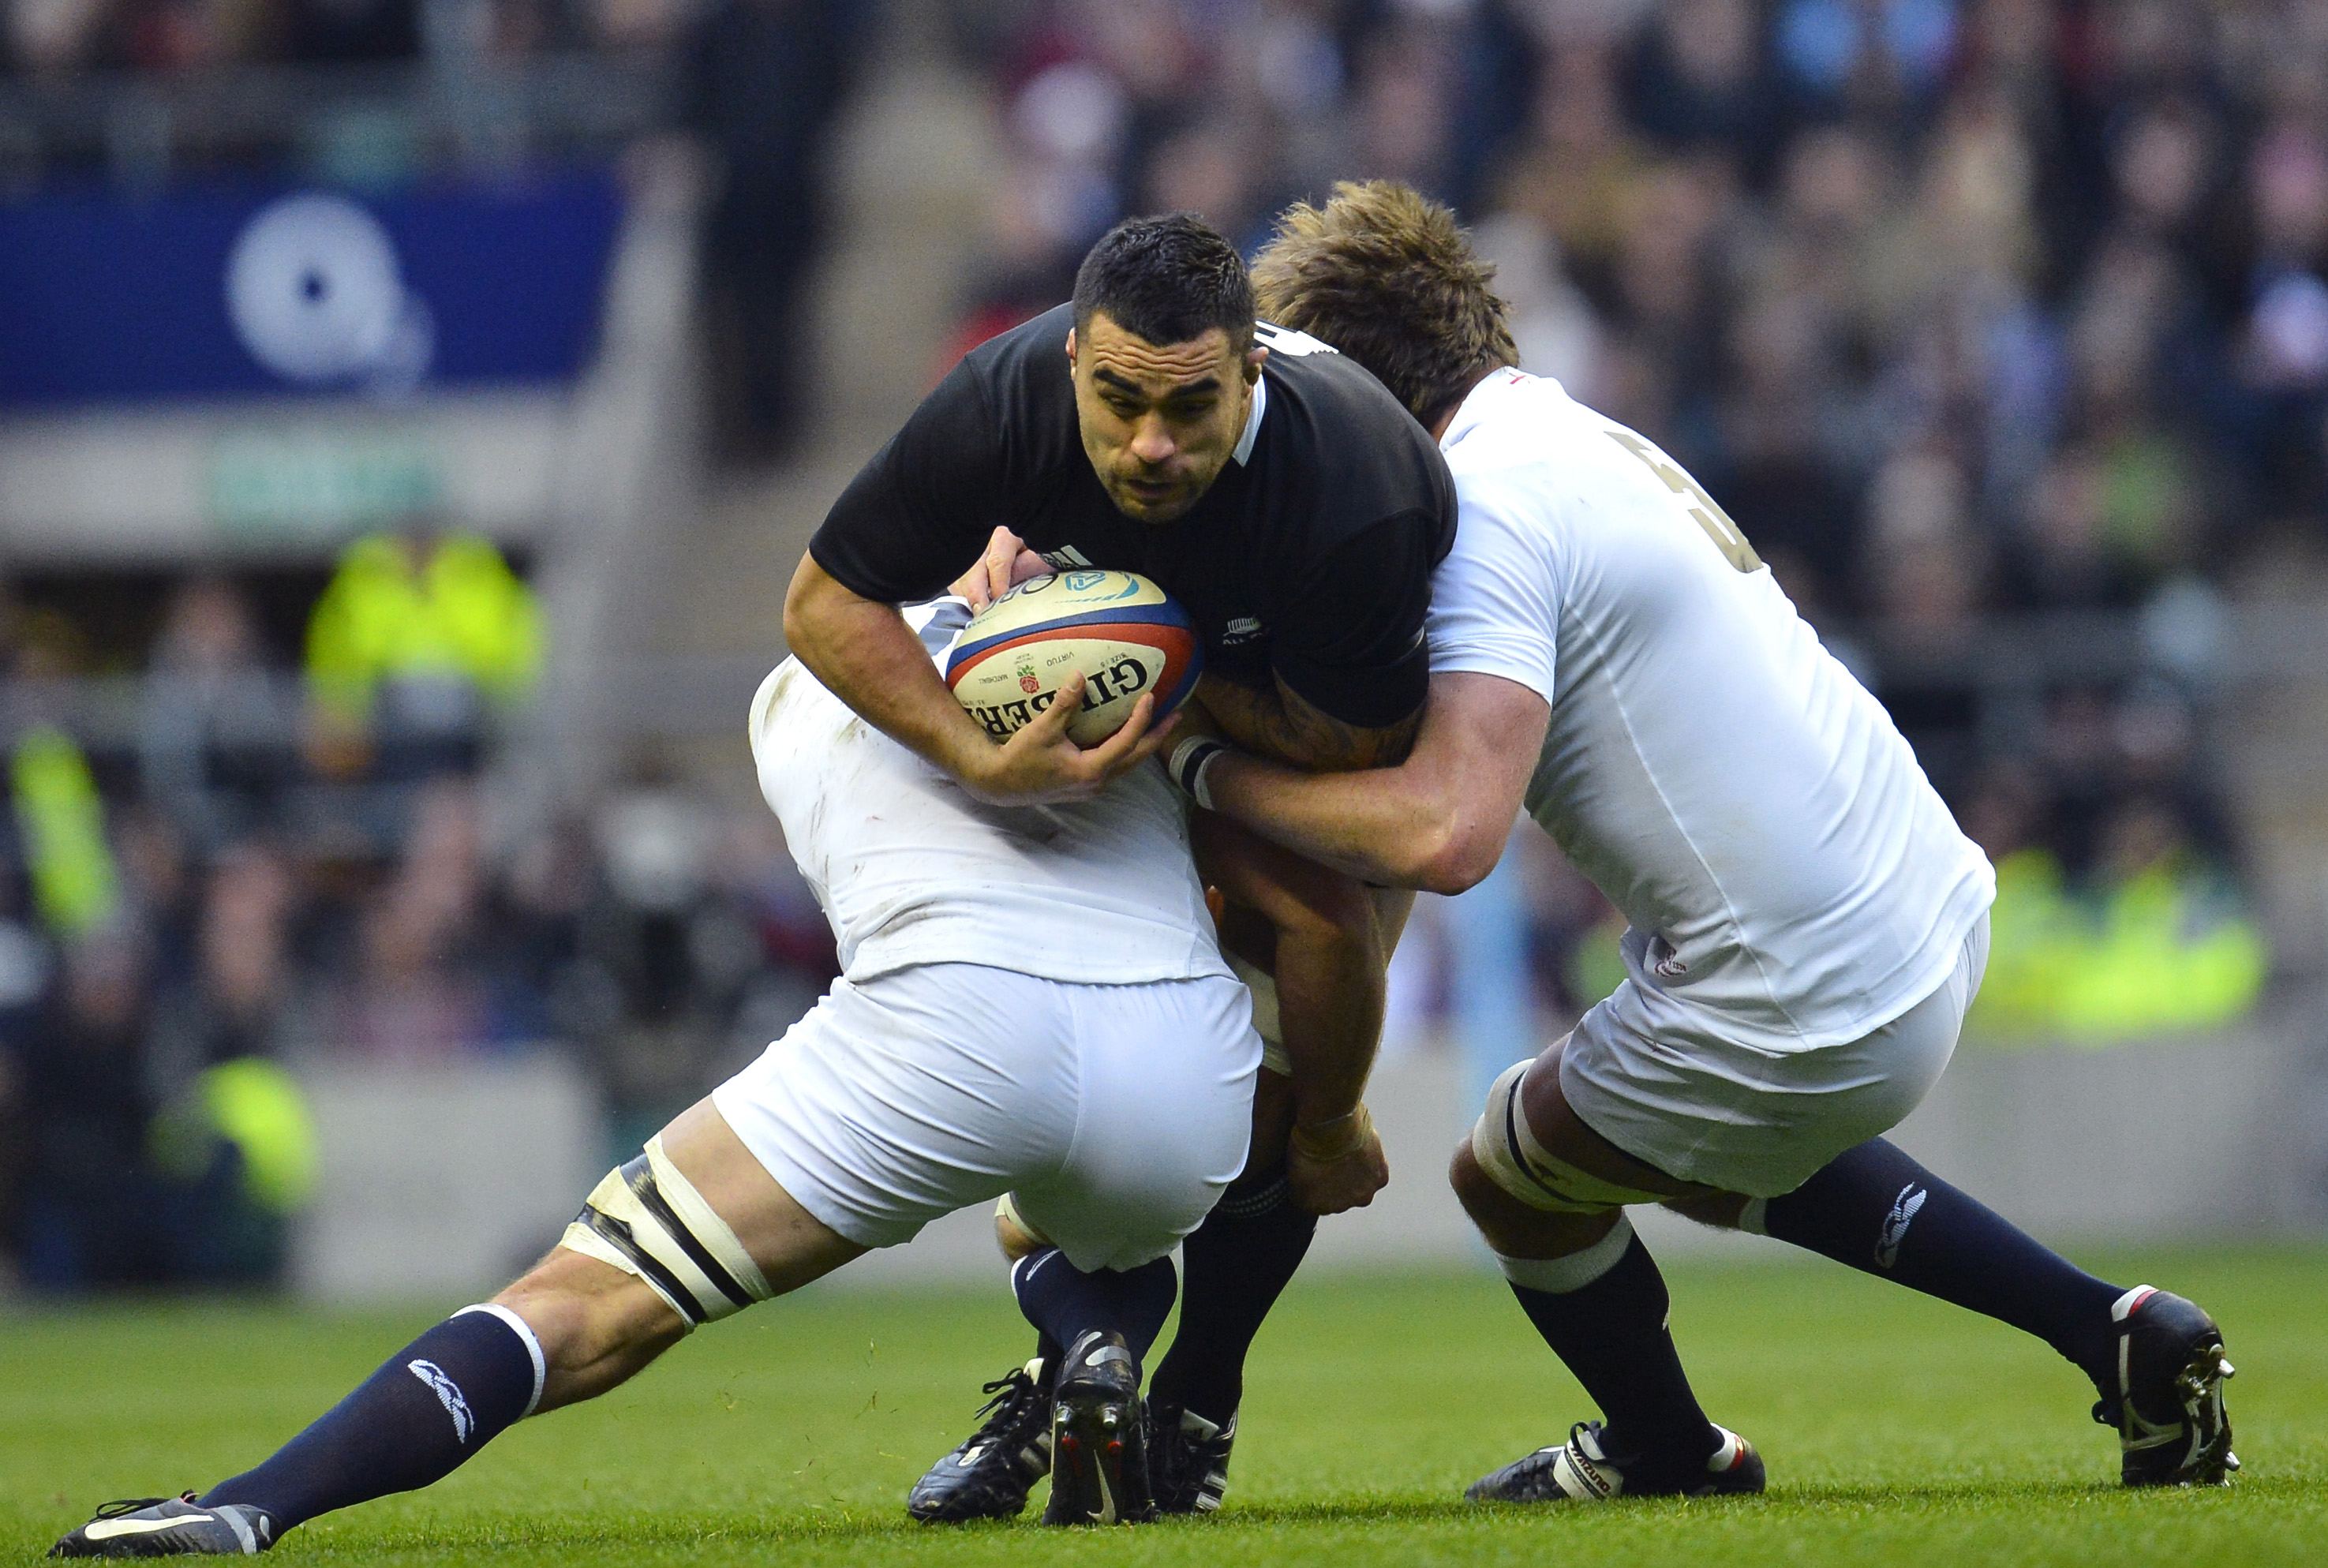 Liam Messam in action against England for the All Blacks XVs team. Photo: Reuters